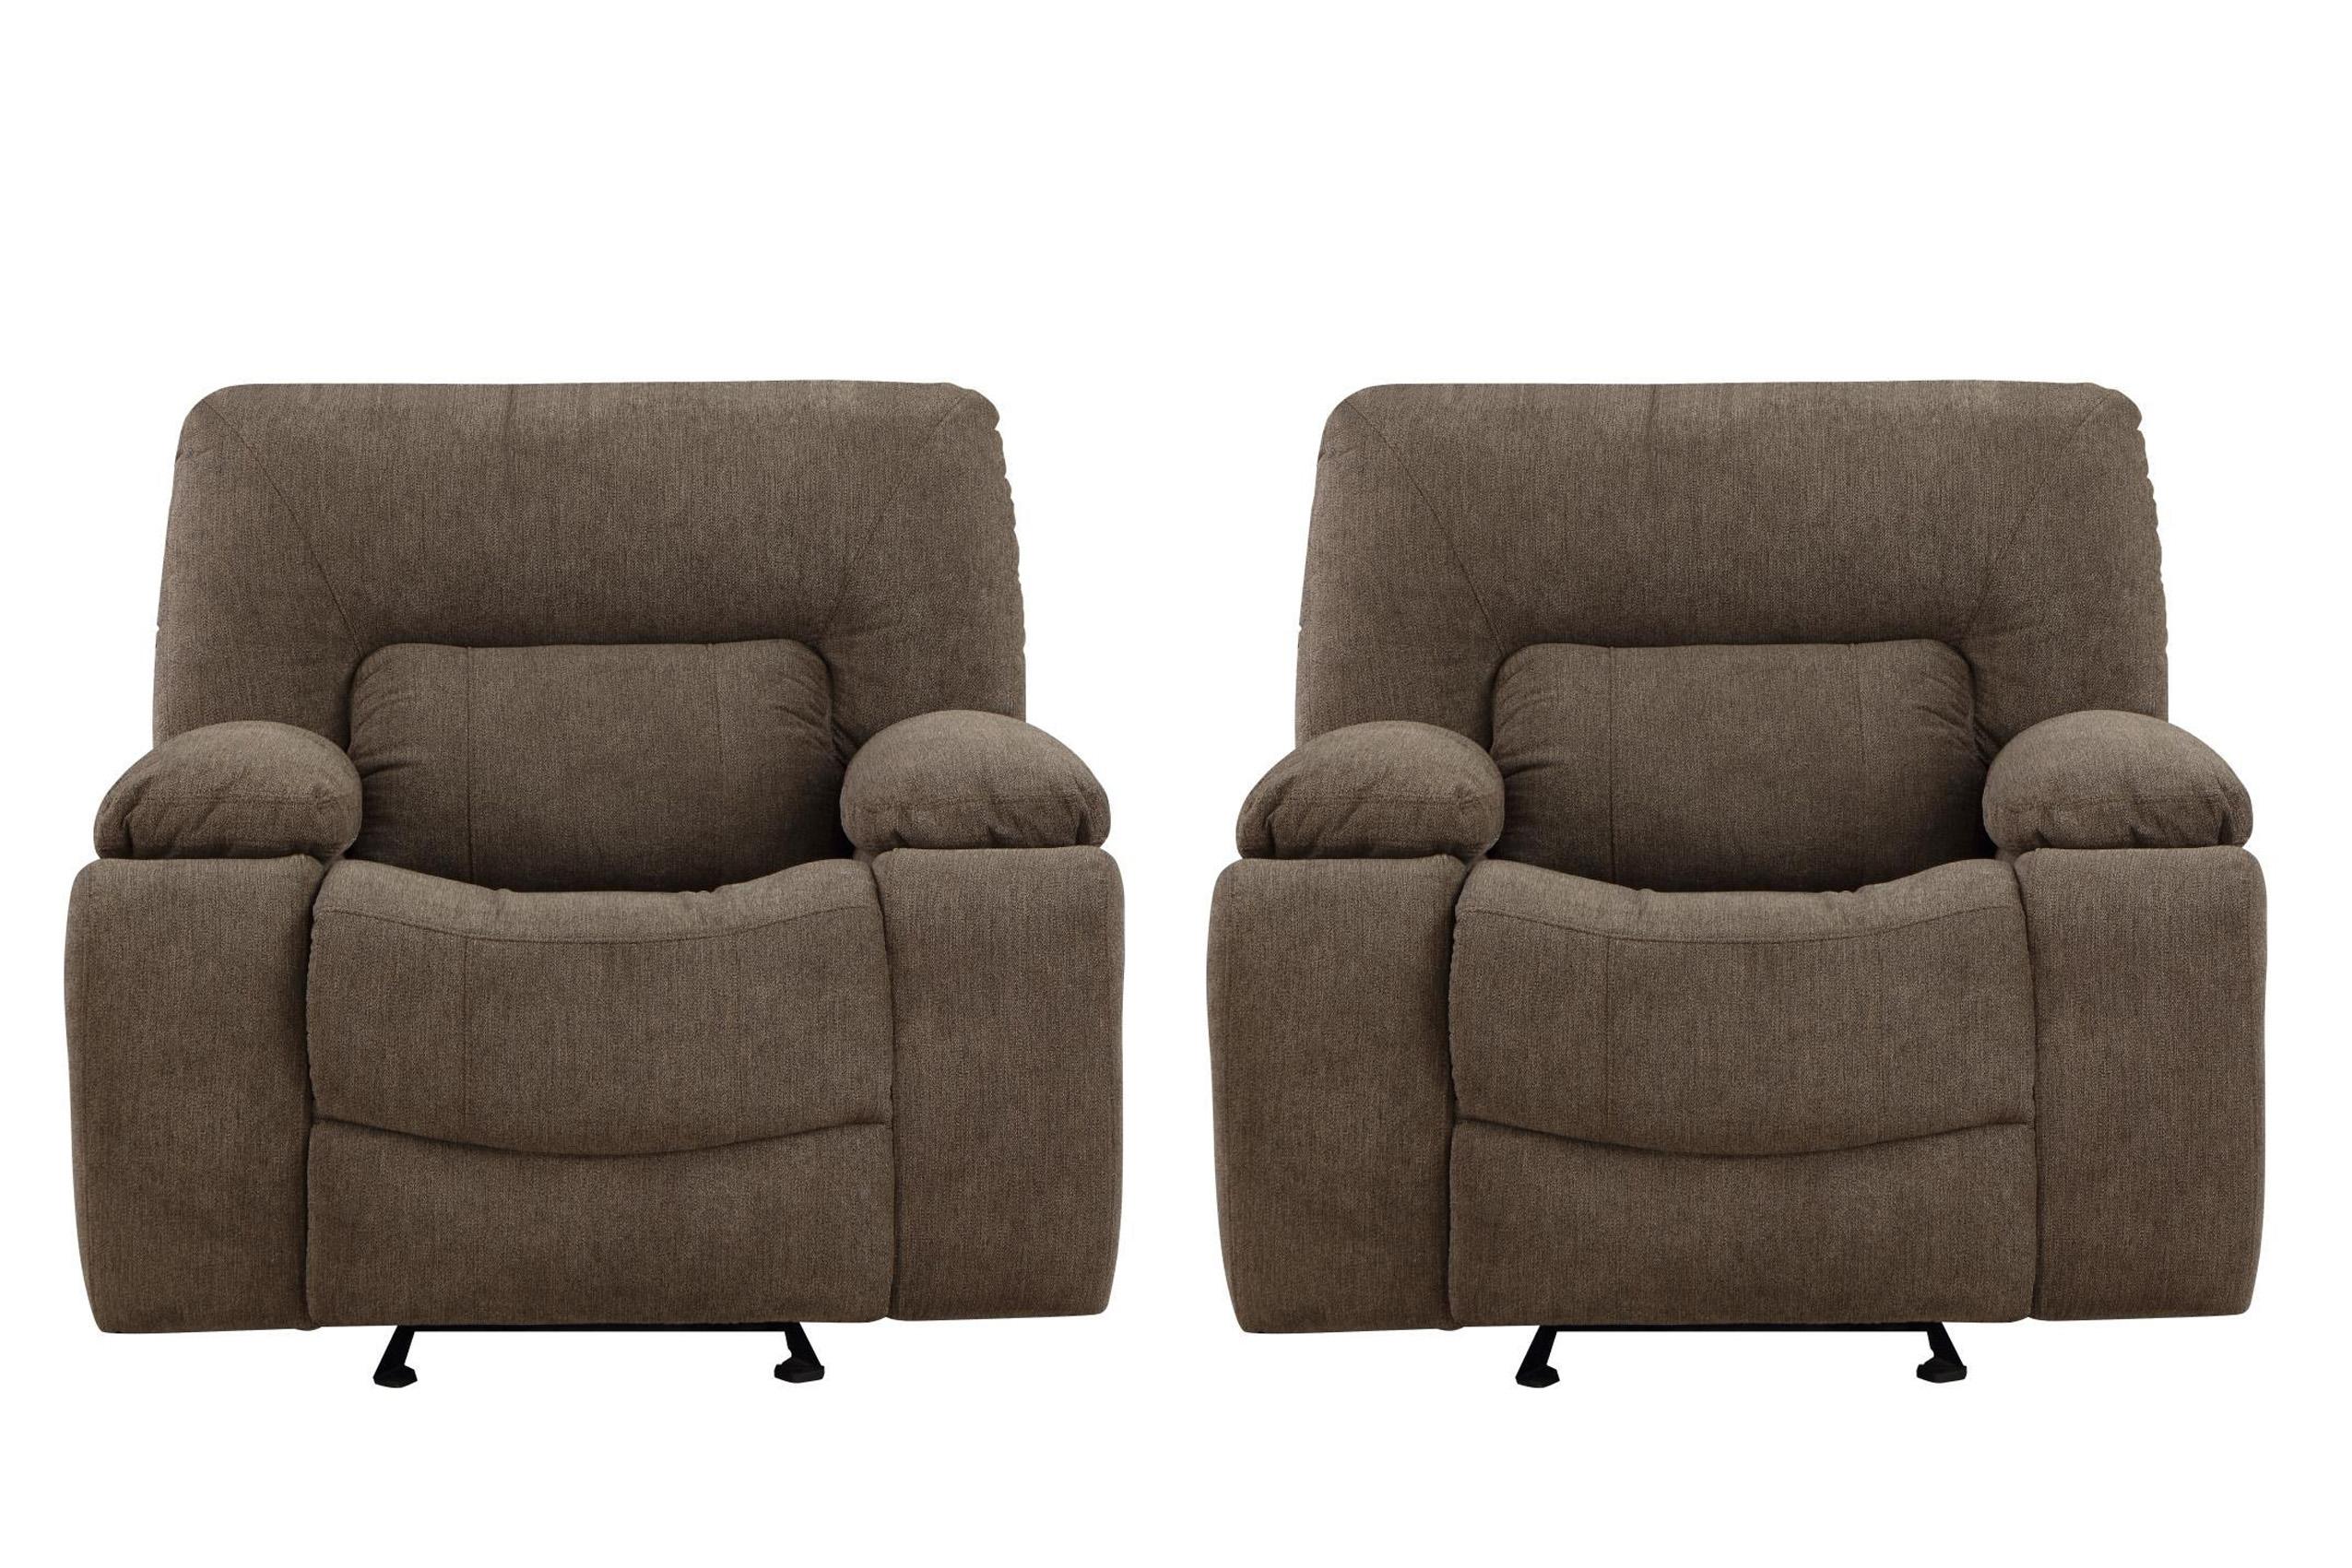 Contemporary, Modern Recliner Chair Set OHIO-BR OHIO-BR-CH-Set-2 in Brown Chenille